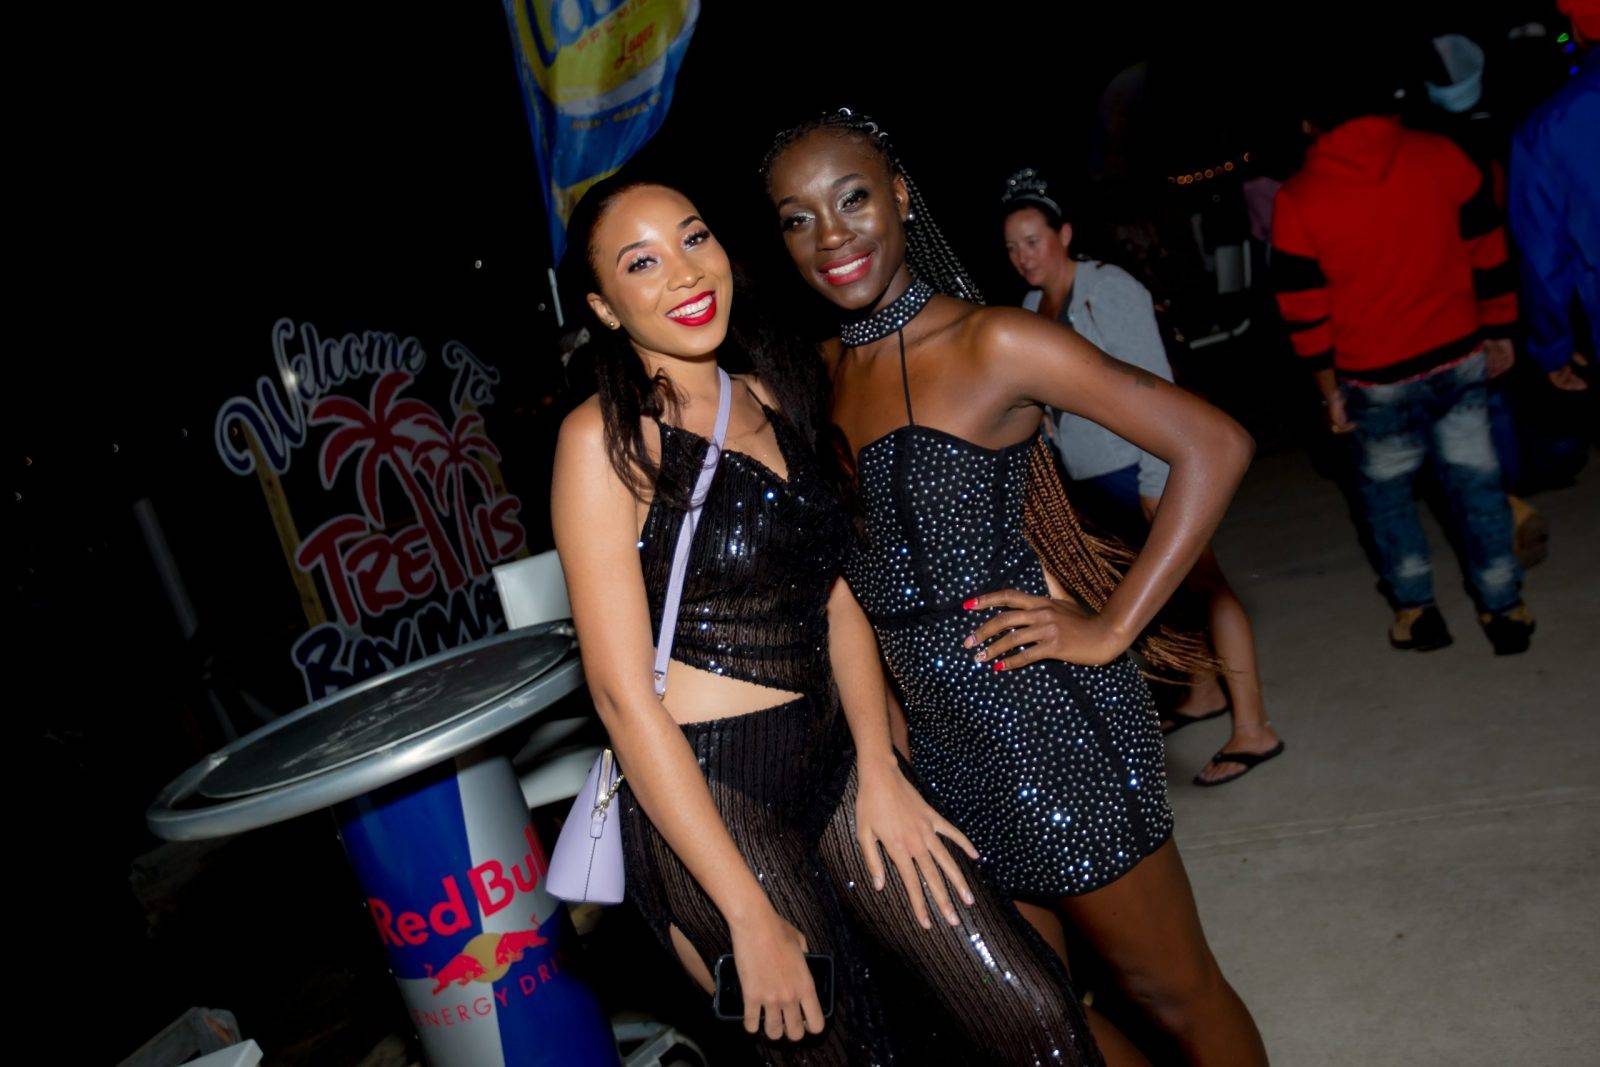 Two women in their black party outfit